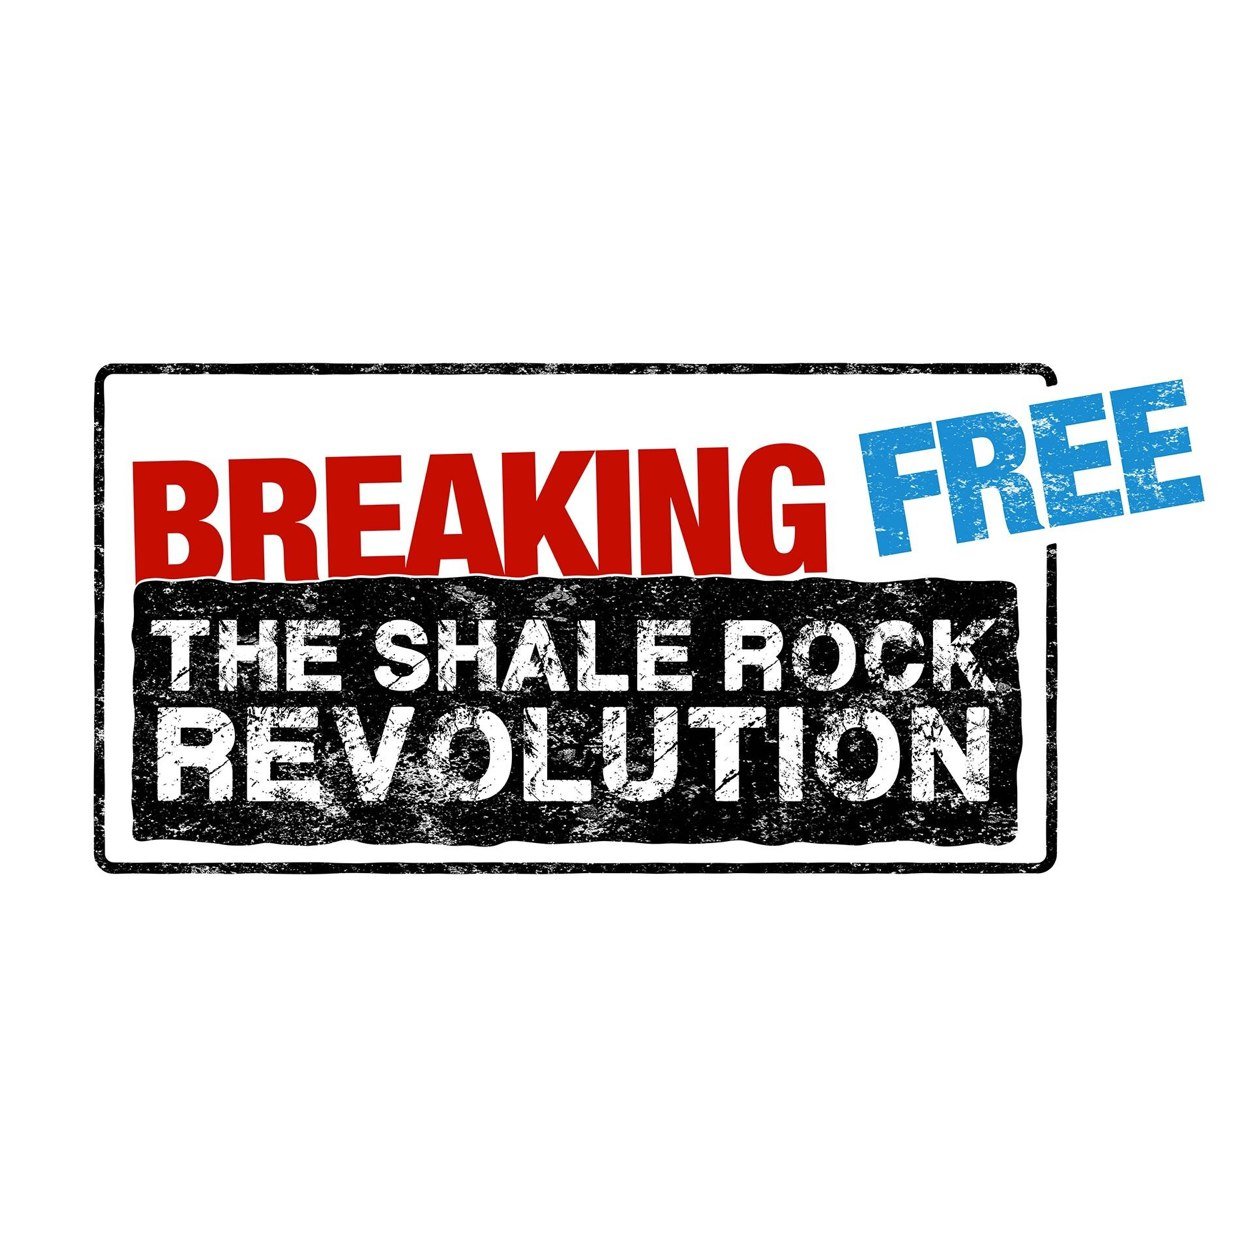 A new documentary on the facts behind fracking and the American shale revolution.